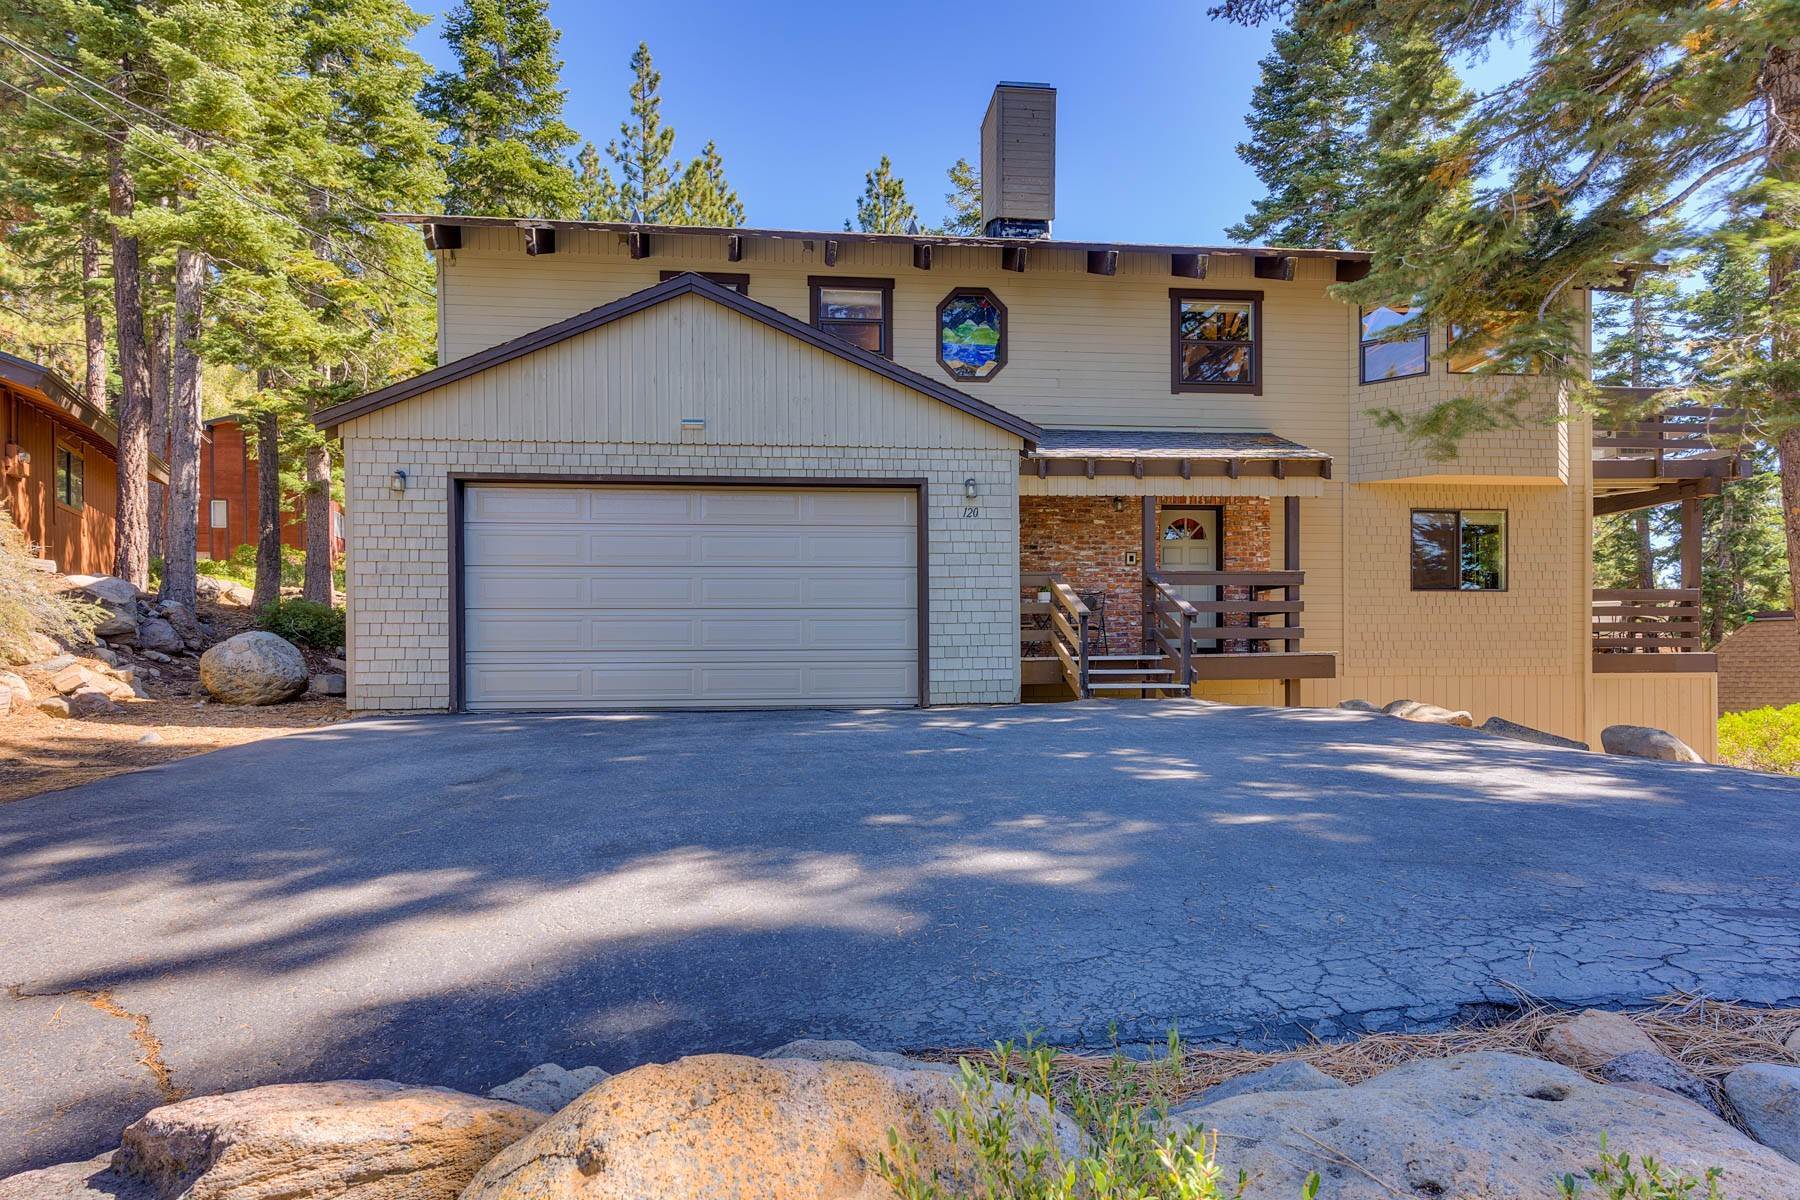 Single Family Homes for Active at Spacious Lakeview Home 120 Lakewood Ln Tahoe City, California 96145 United States